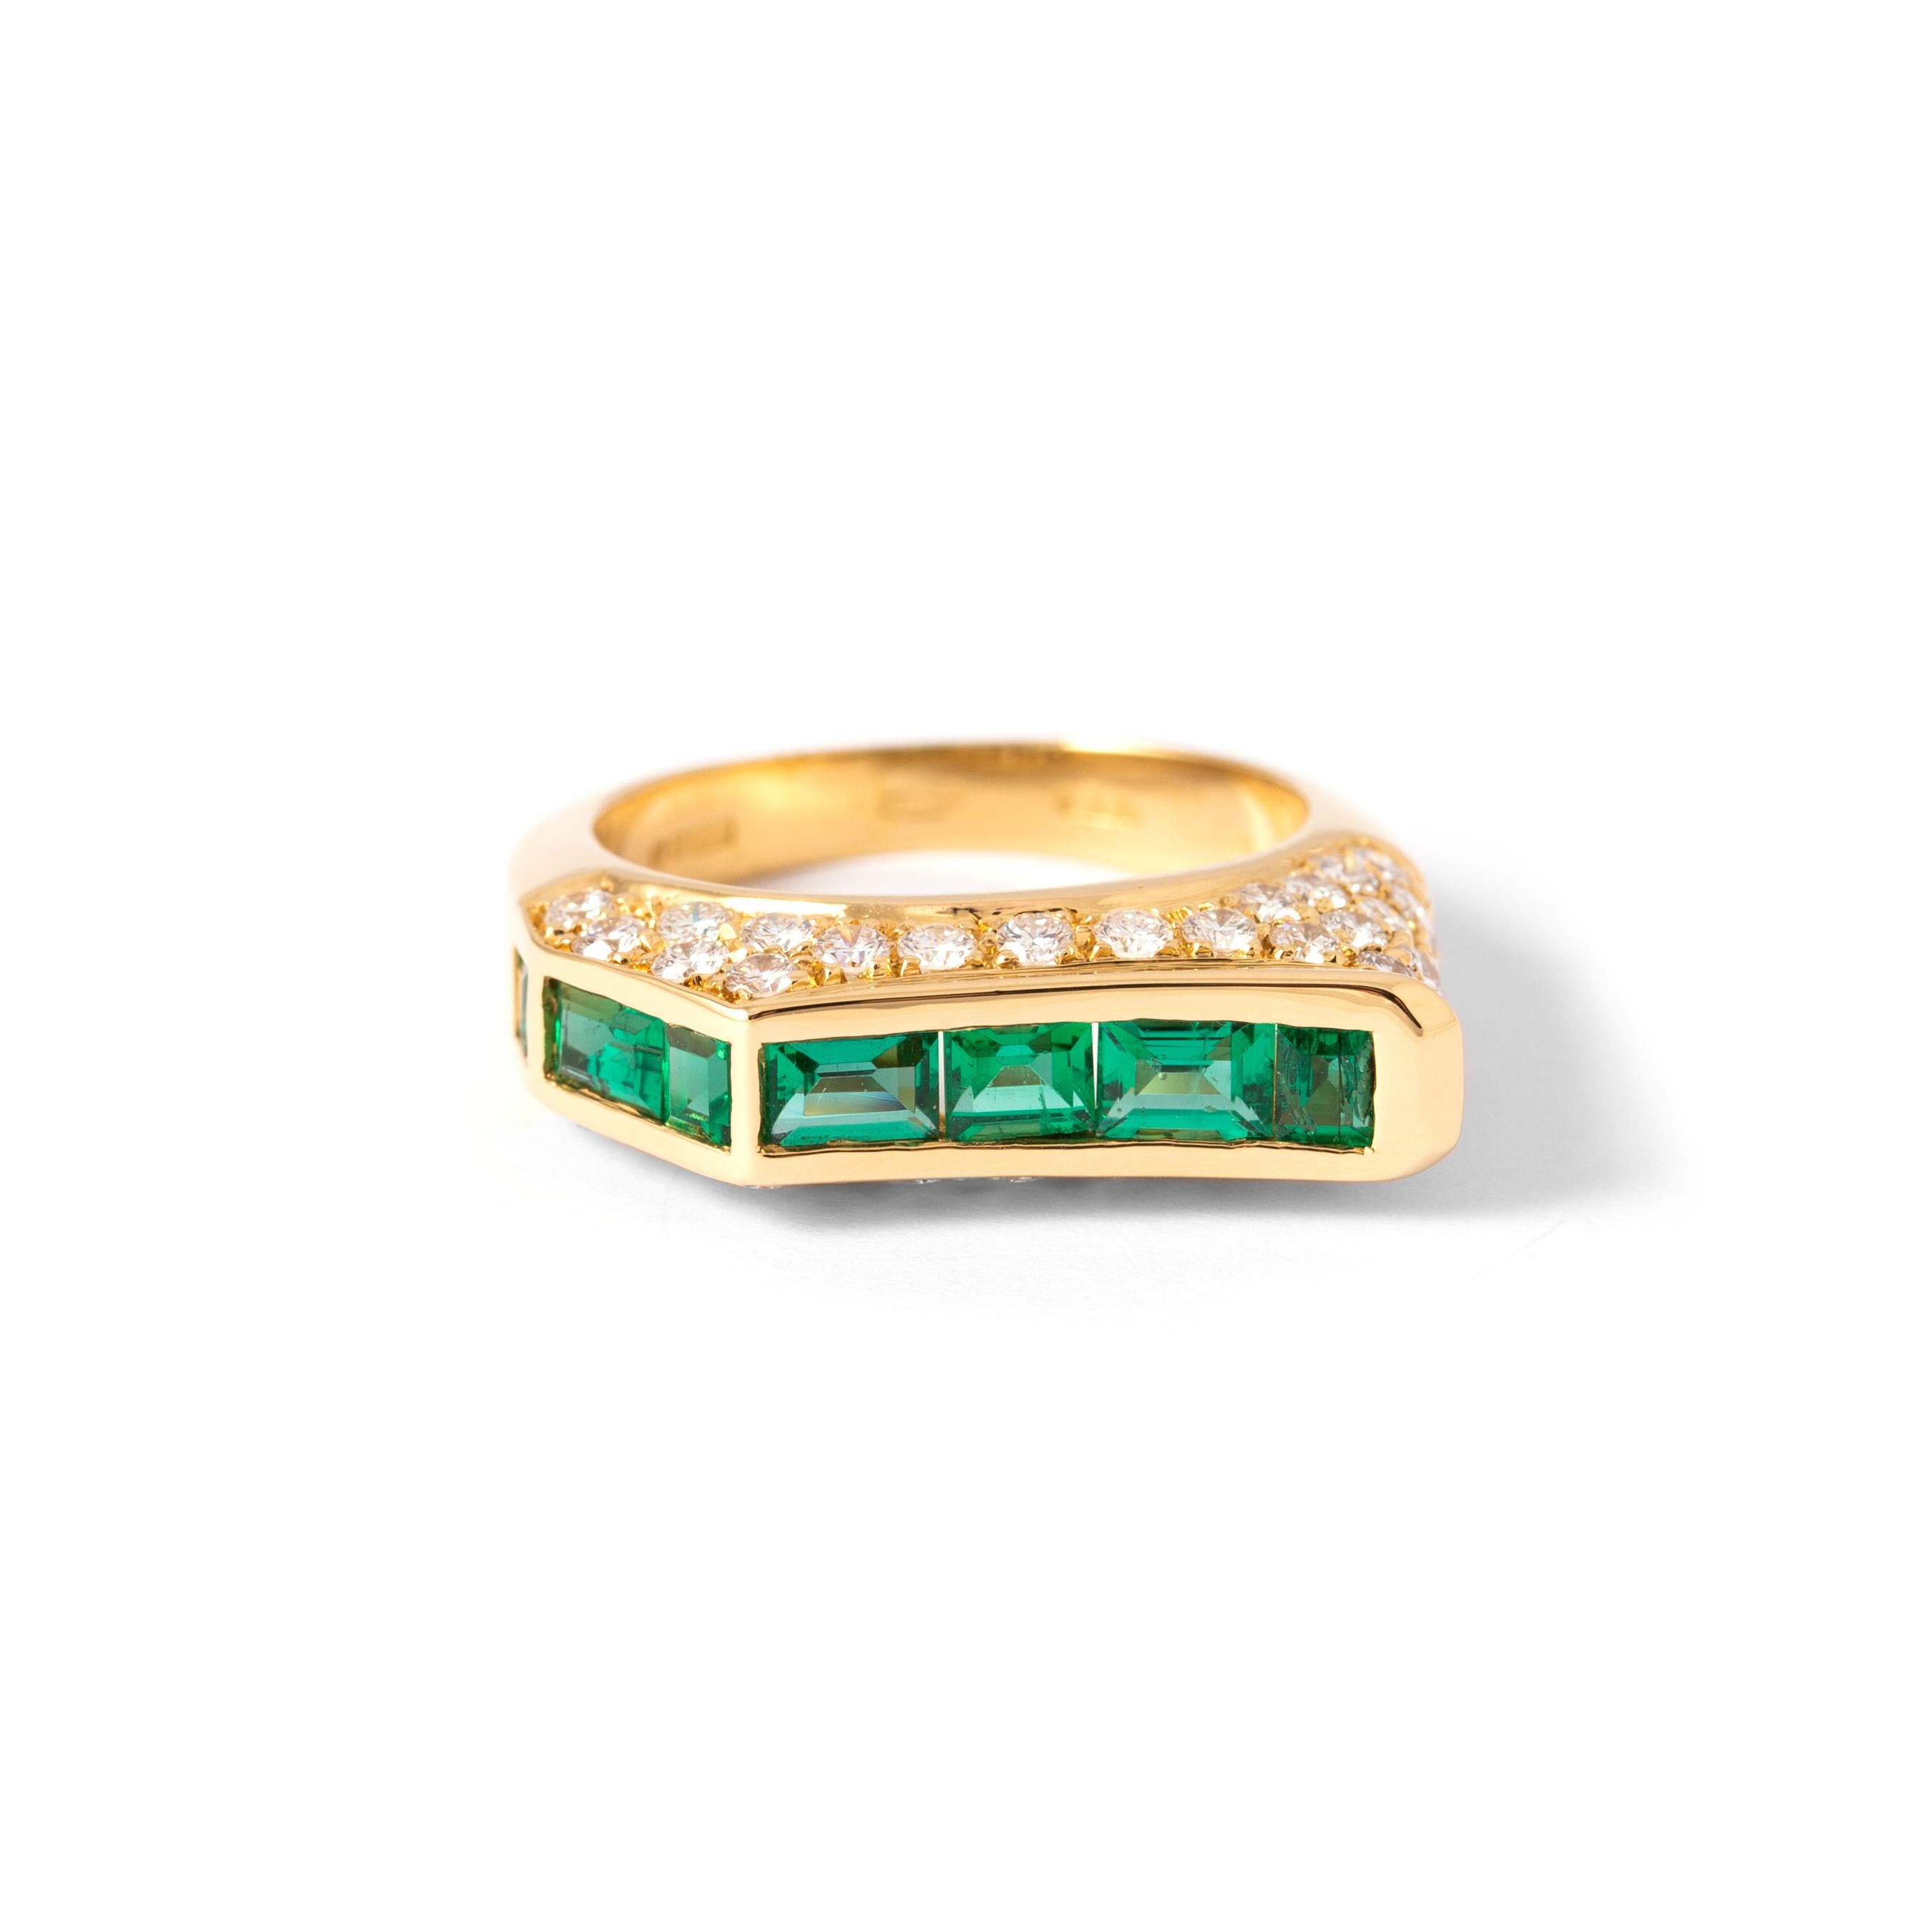 Ring in 18kt yellow gold set with square cut emeralds 0.92 cts and diamonds 1.07 cts Size 53